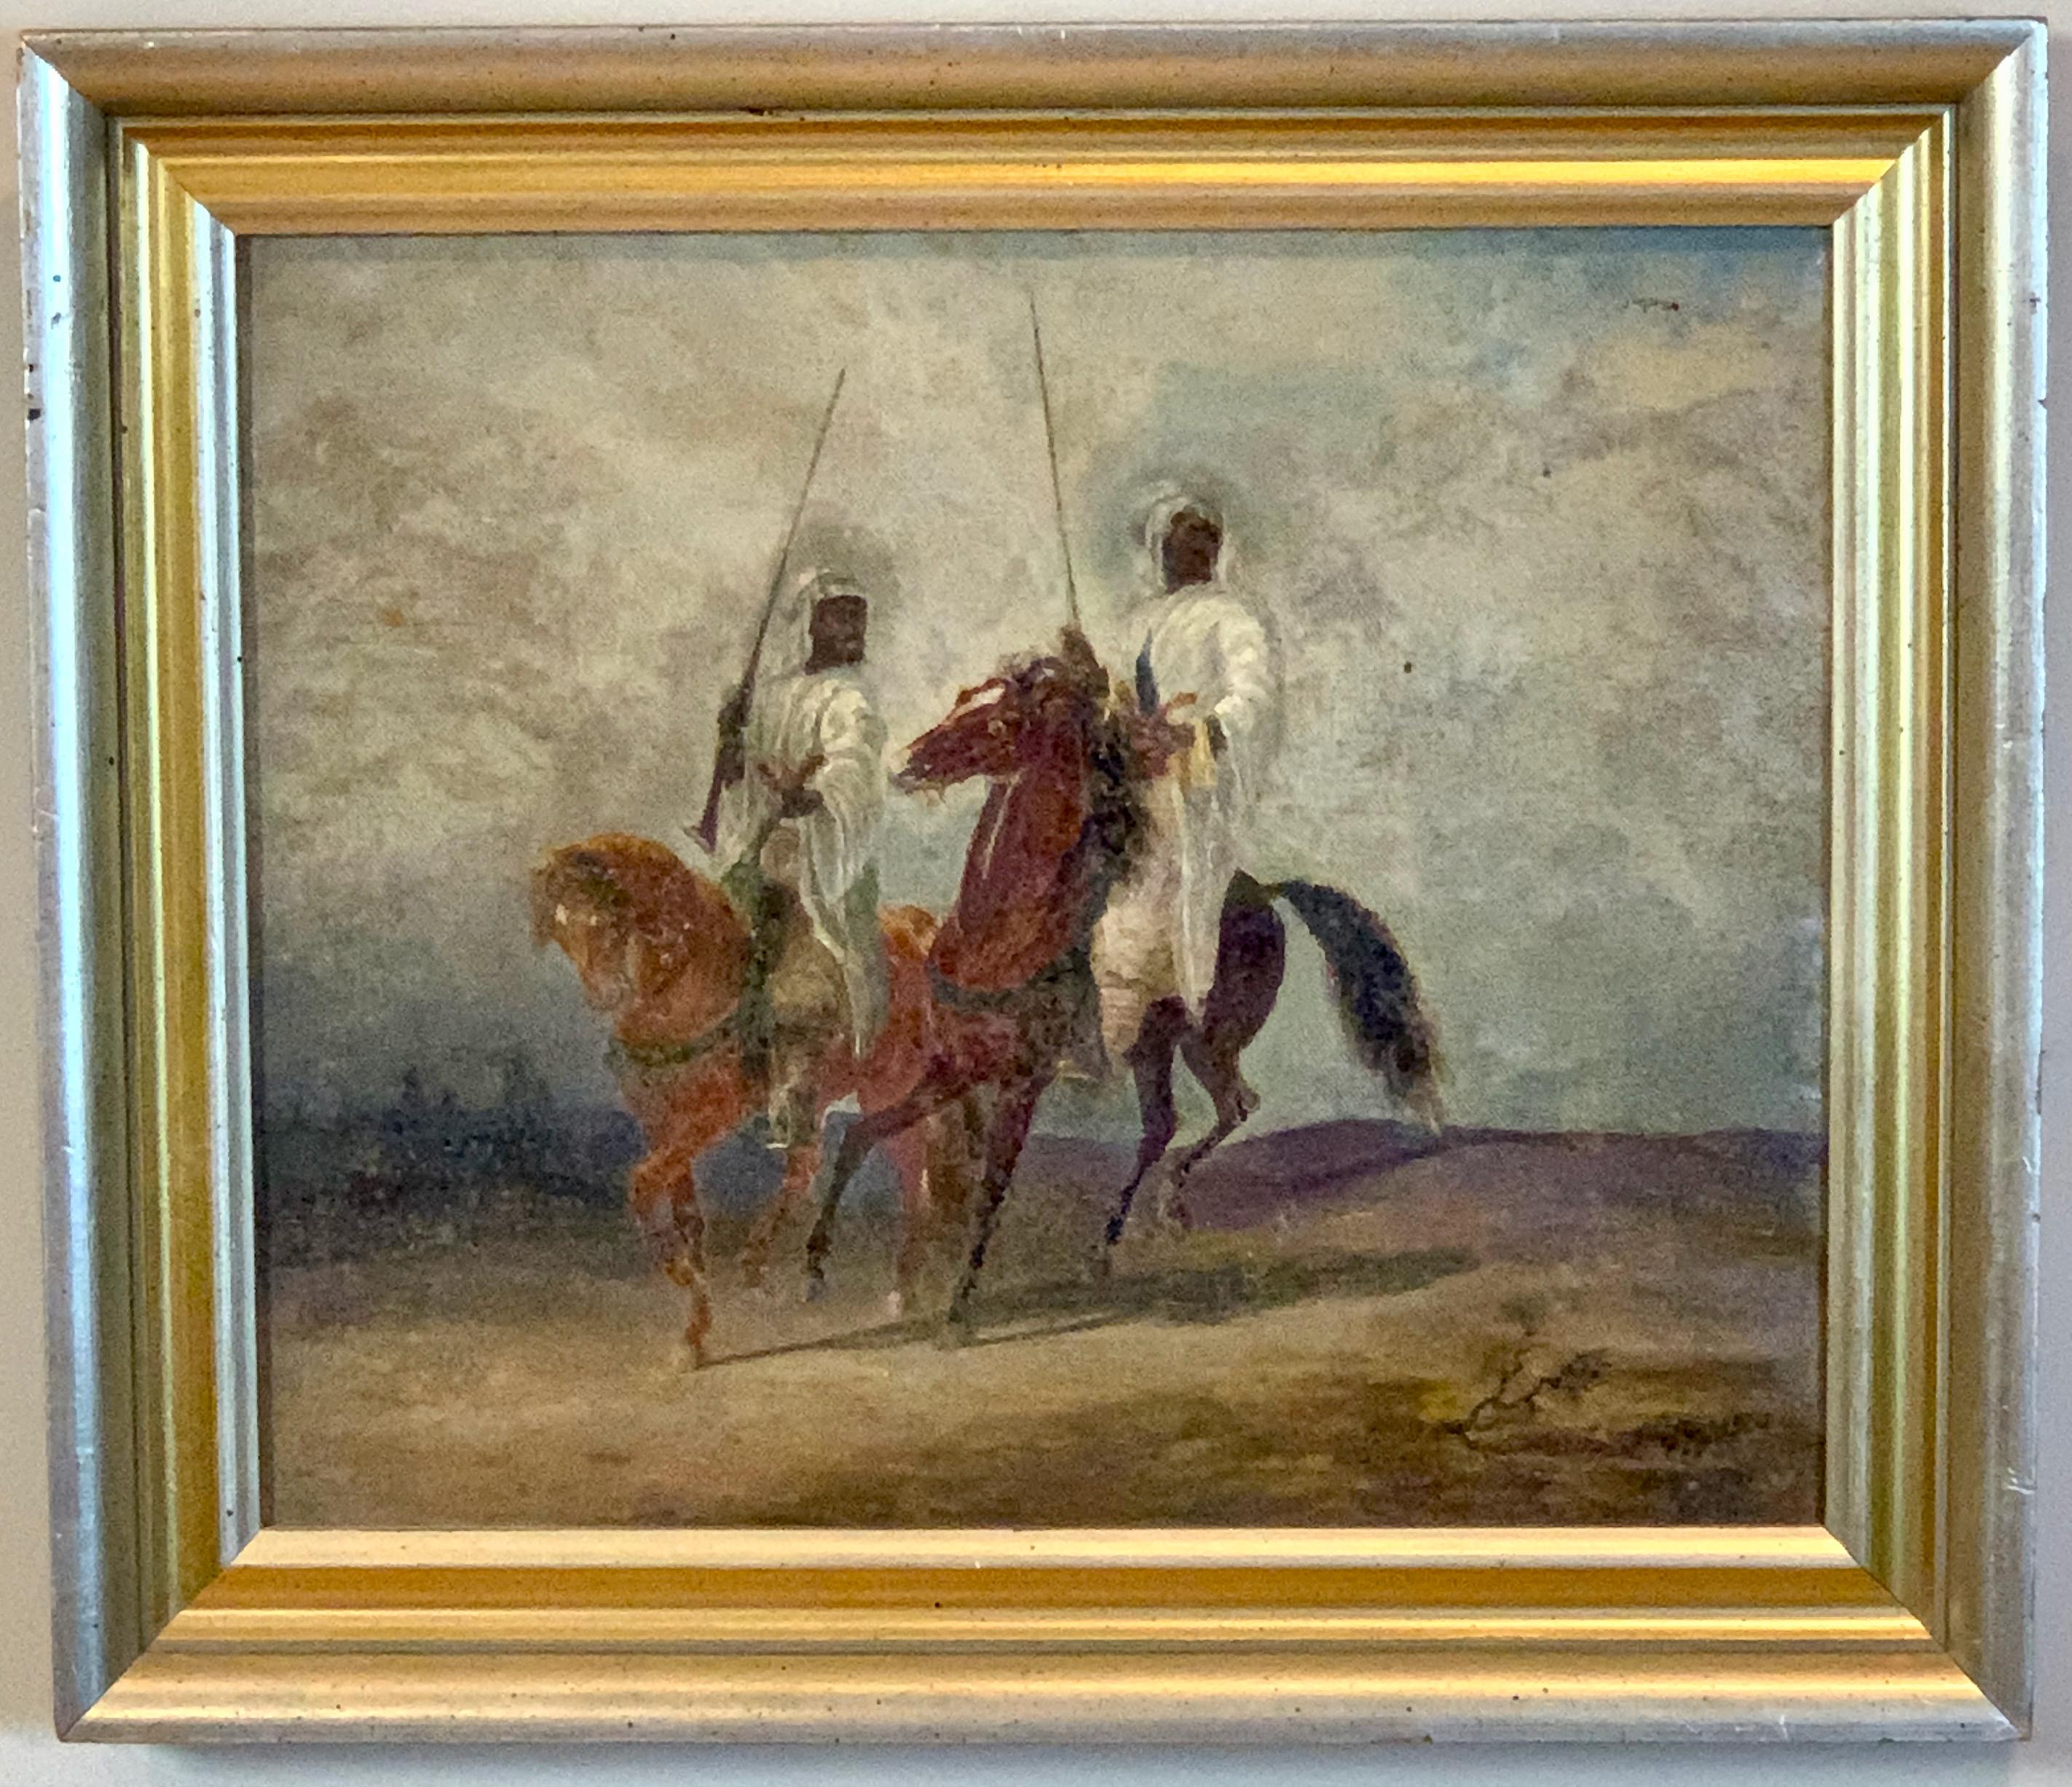 A small and charming early 20th century oil on canvas painting of Bedouin chieftains on horseback in a desert landscape.